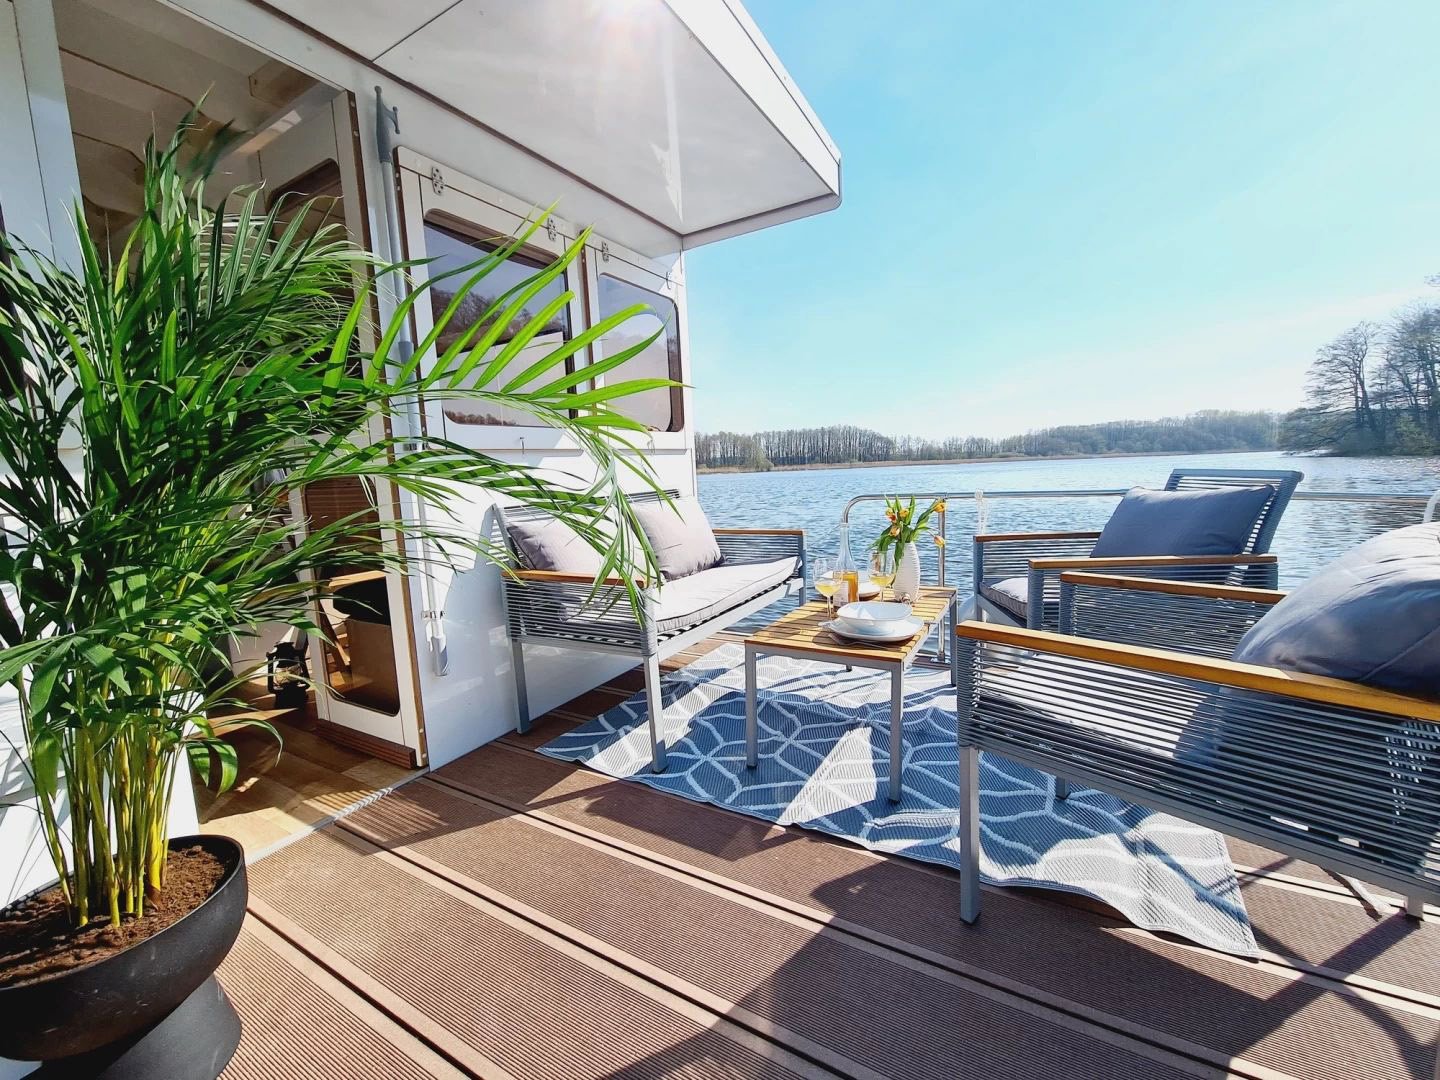 When choosing an electric motor for your houseboat, the following points should be considered: